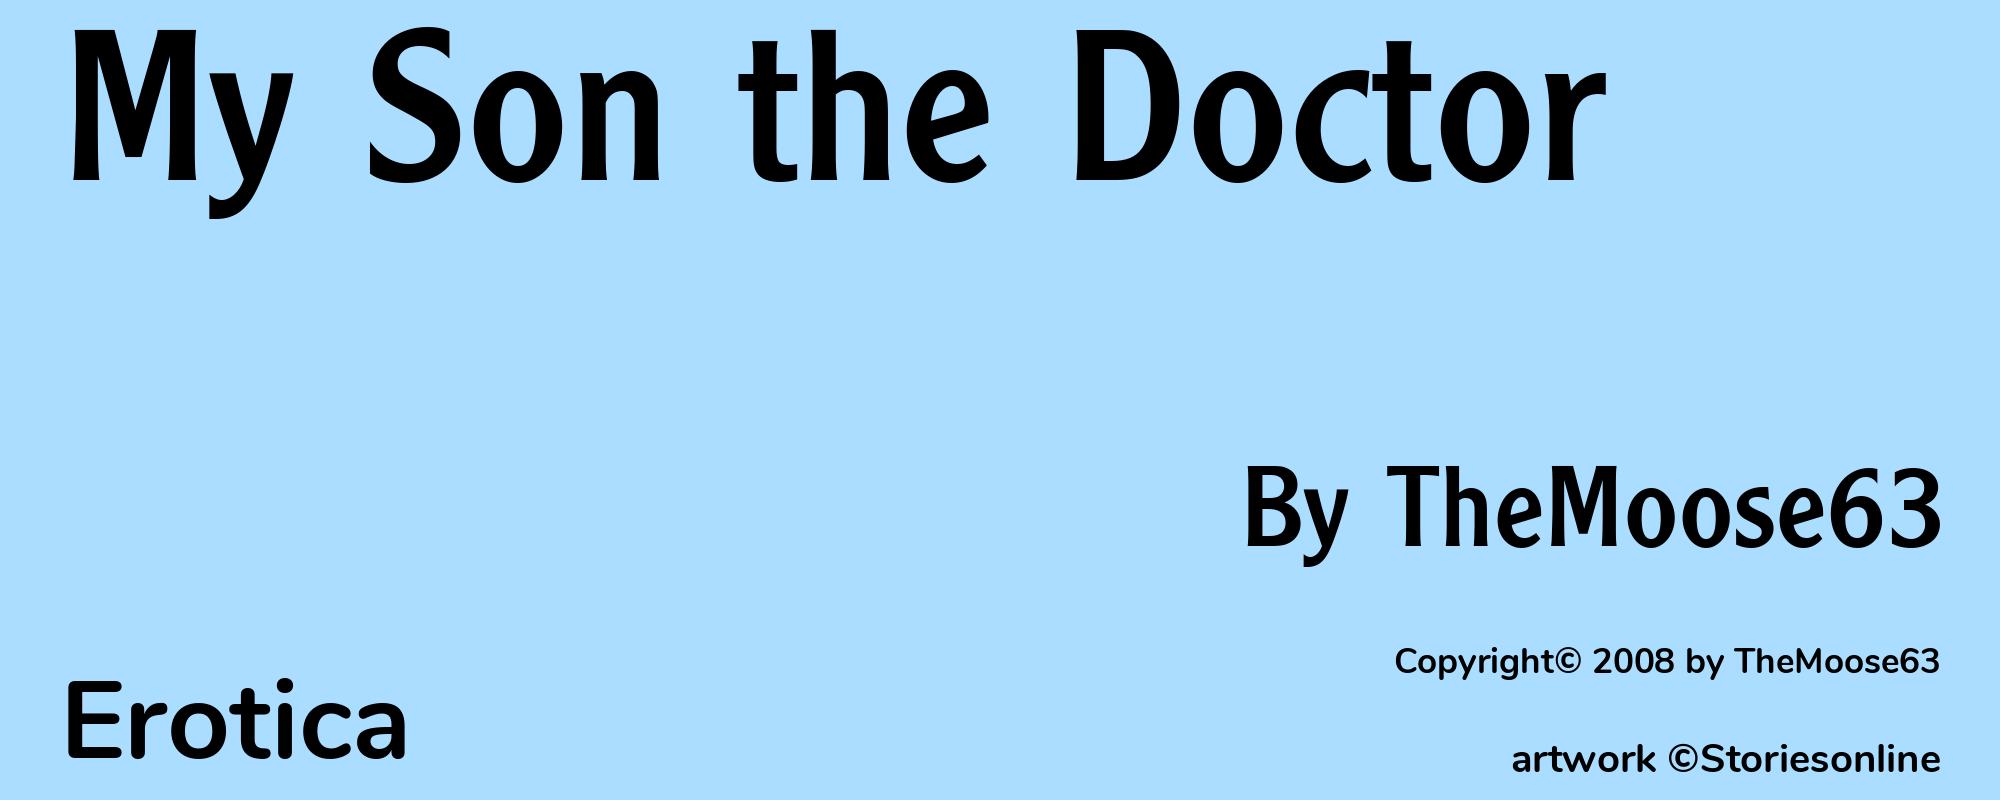 My Son the Doctor - Cover